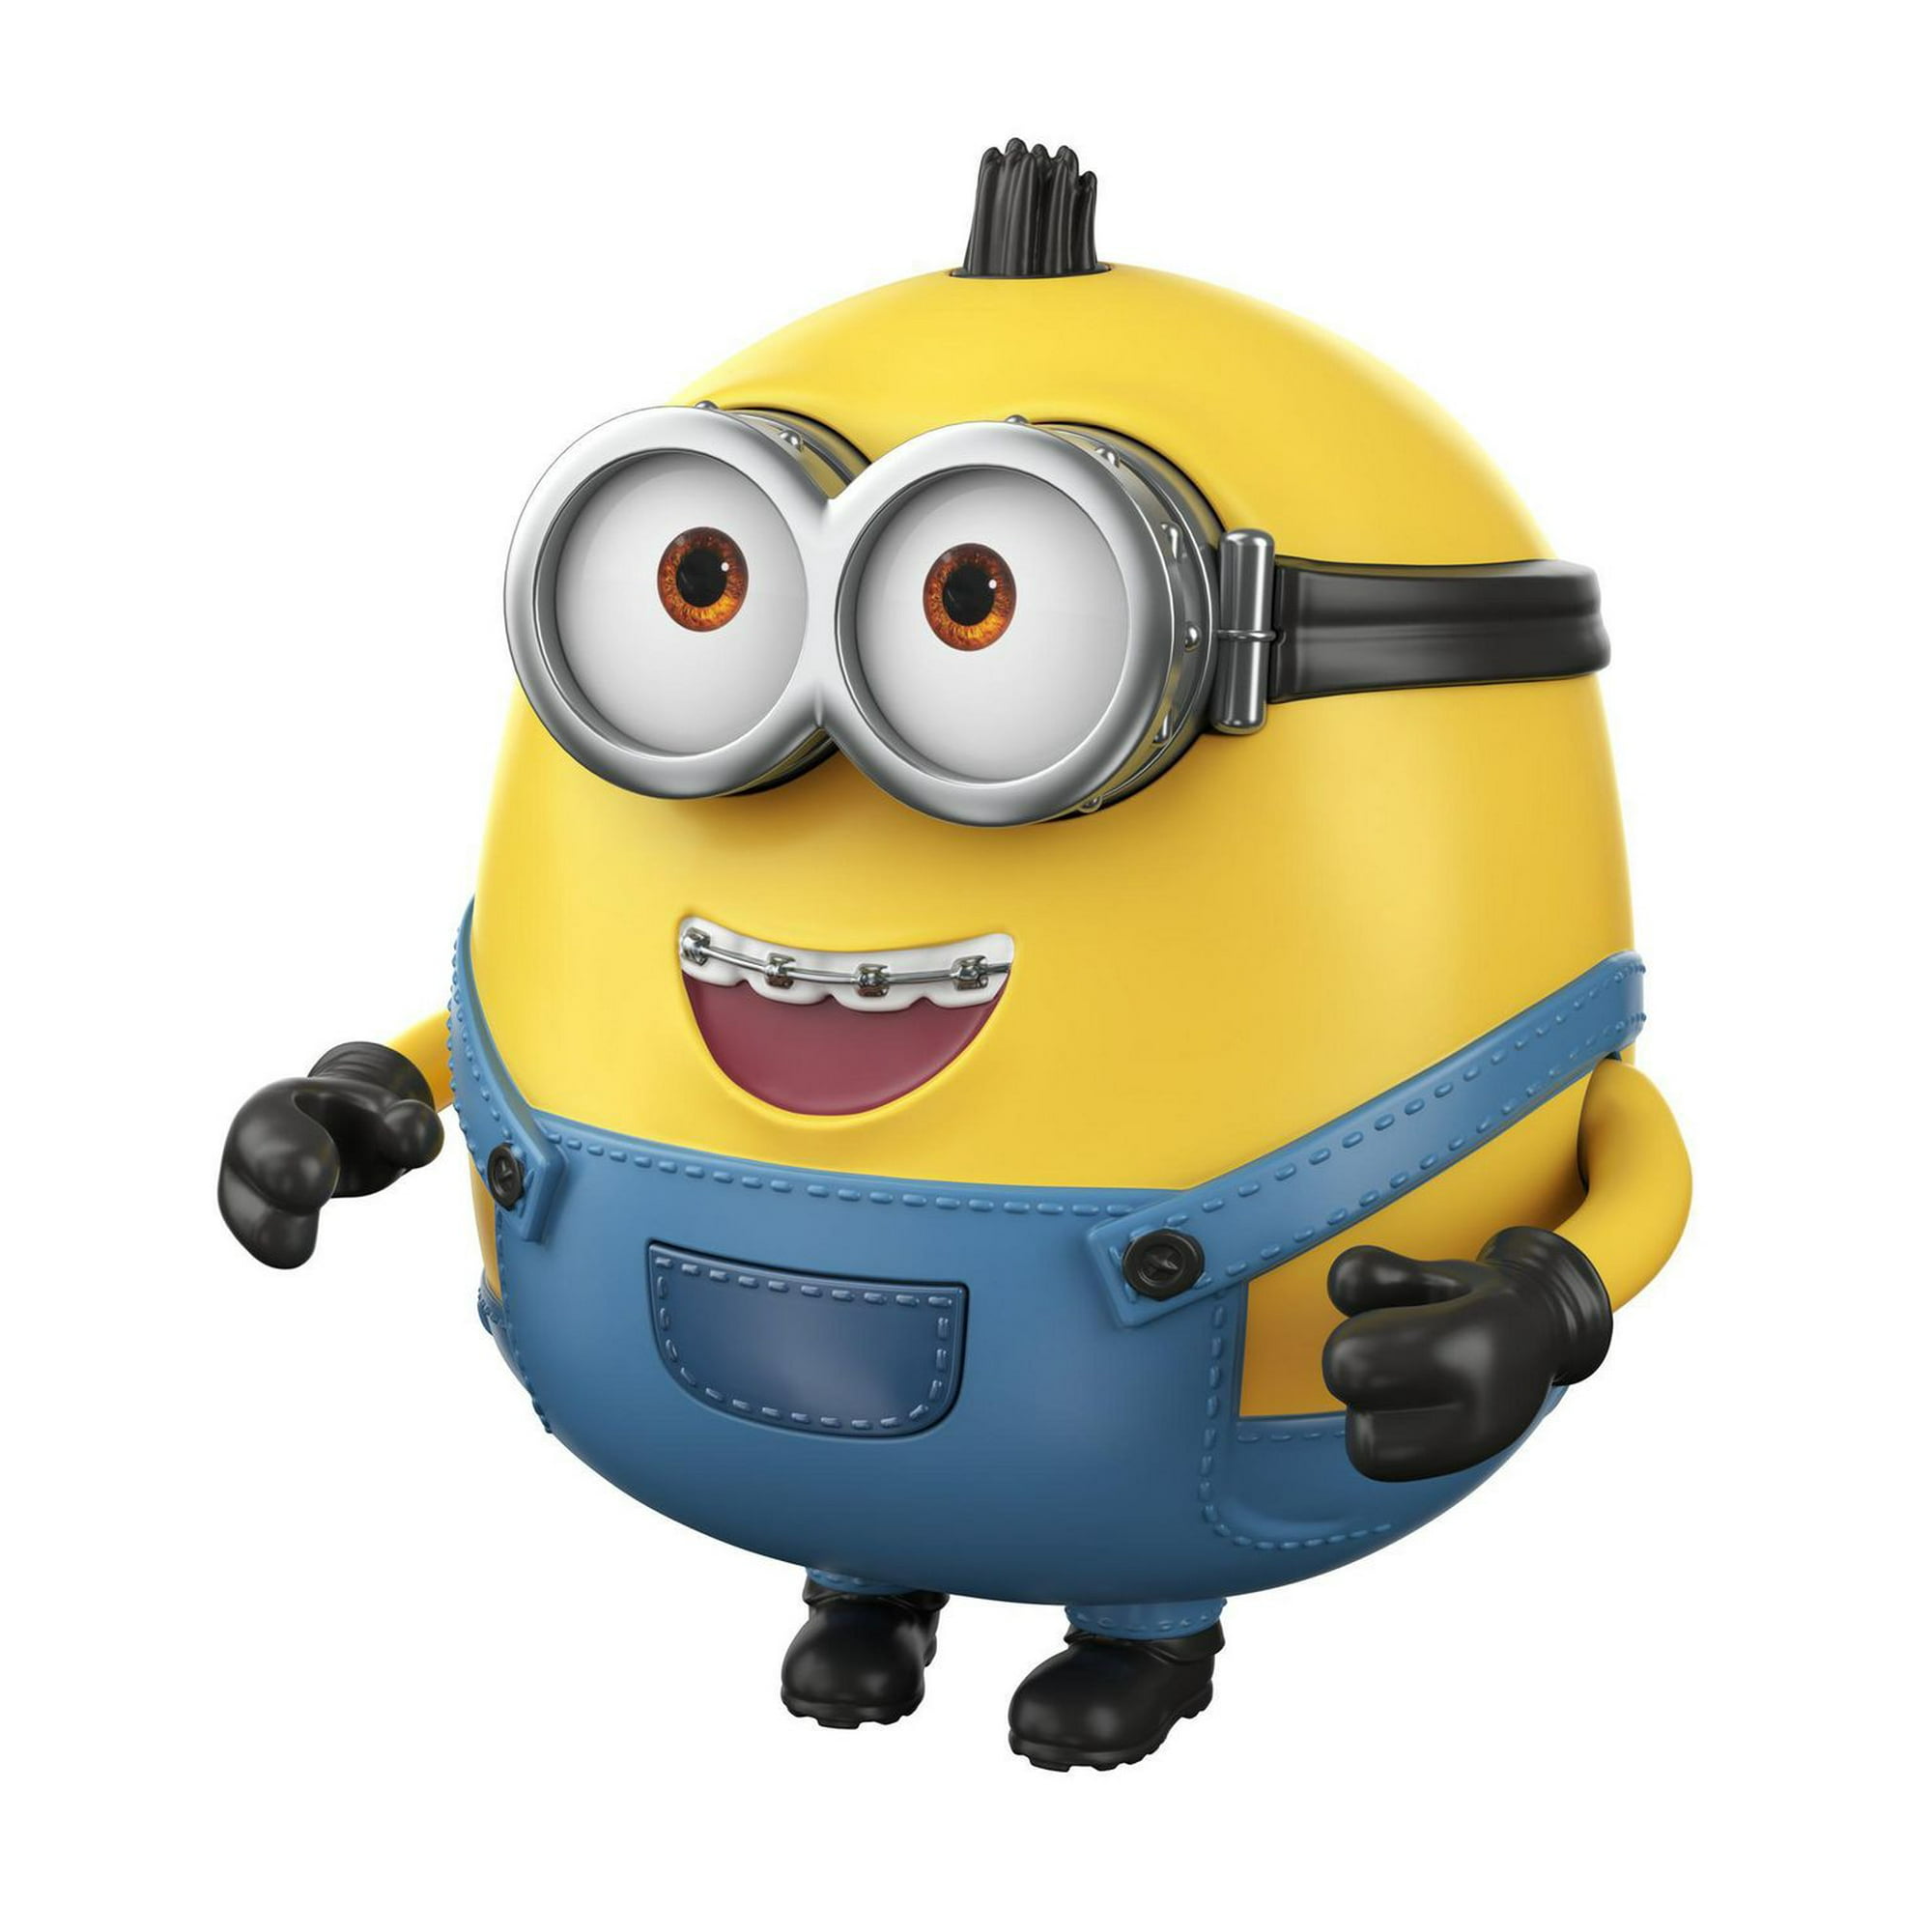 Minions: The Rise of Gru Sing 'N Babble Otto Interactive Action